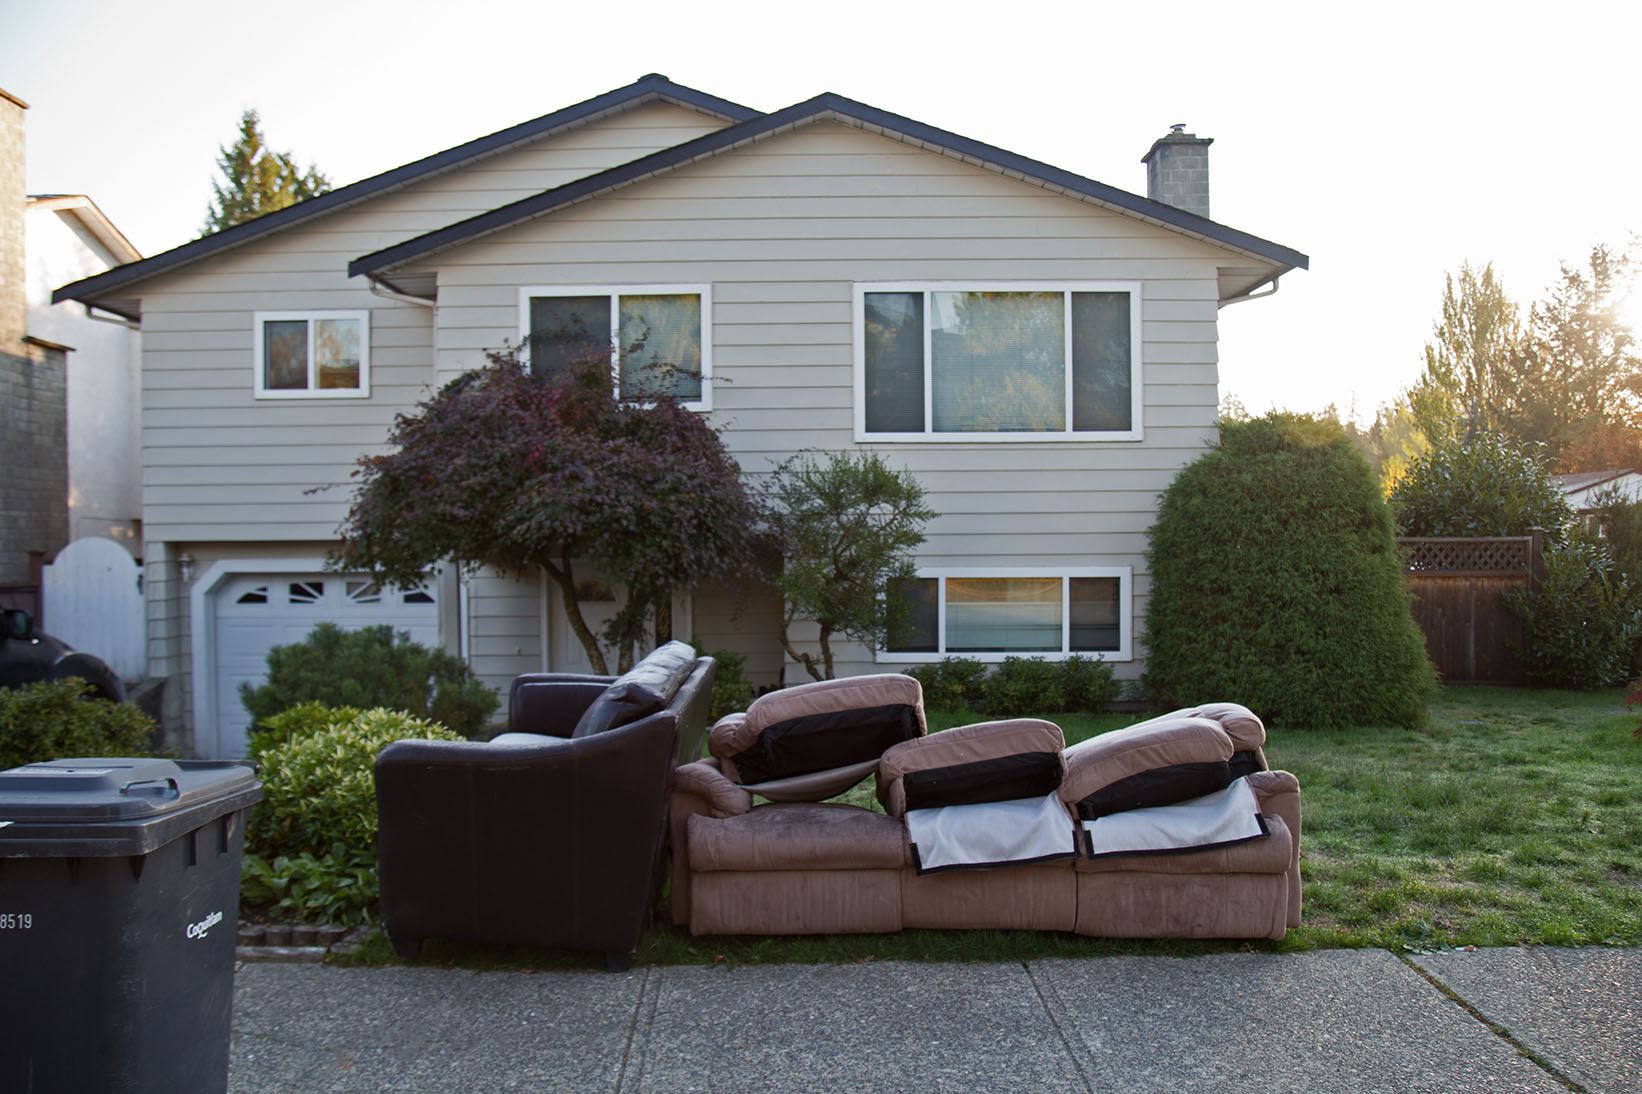 Couch out on the curb